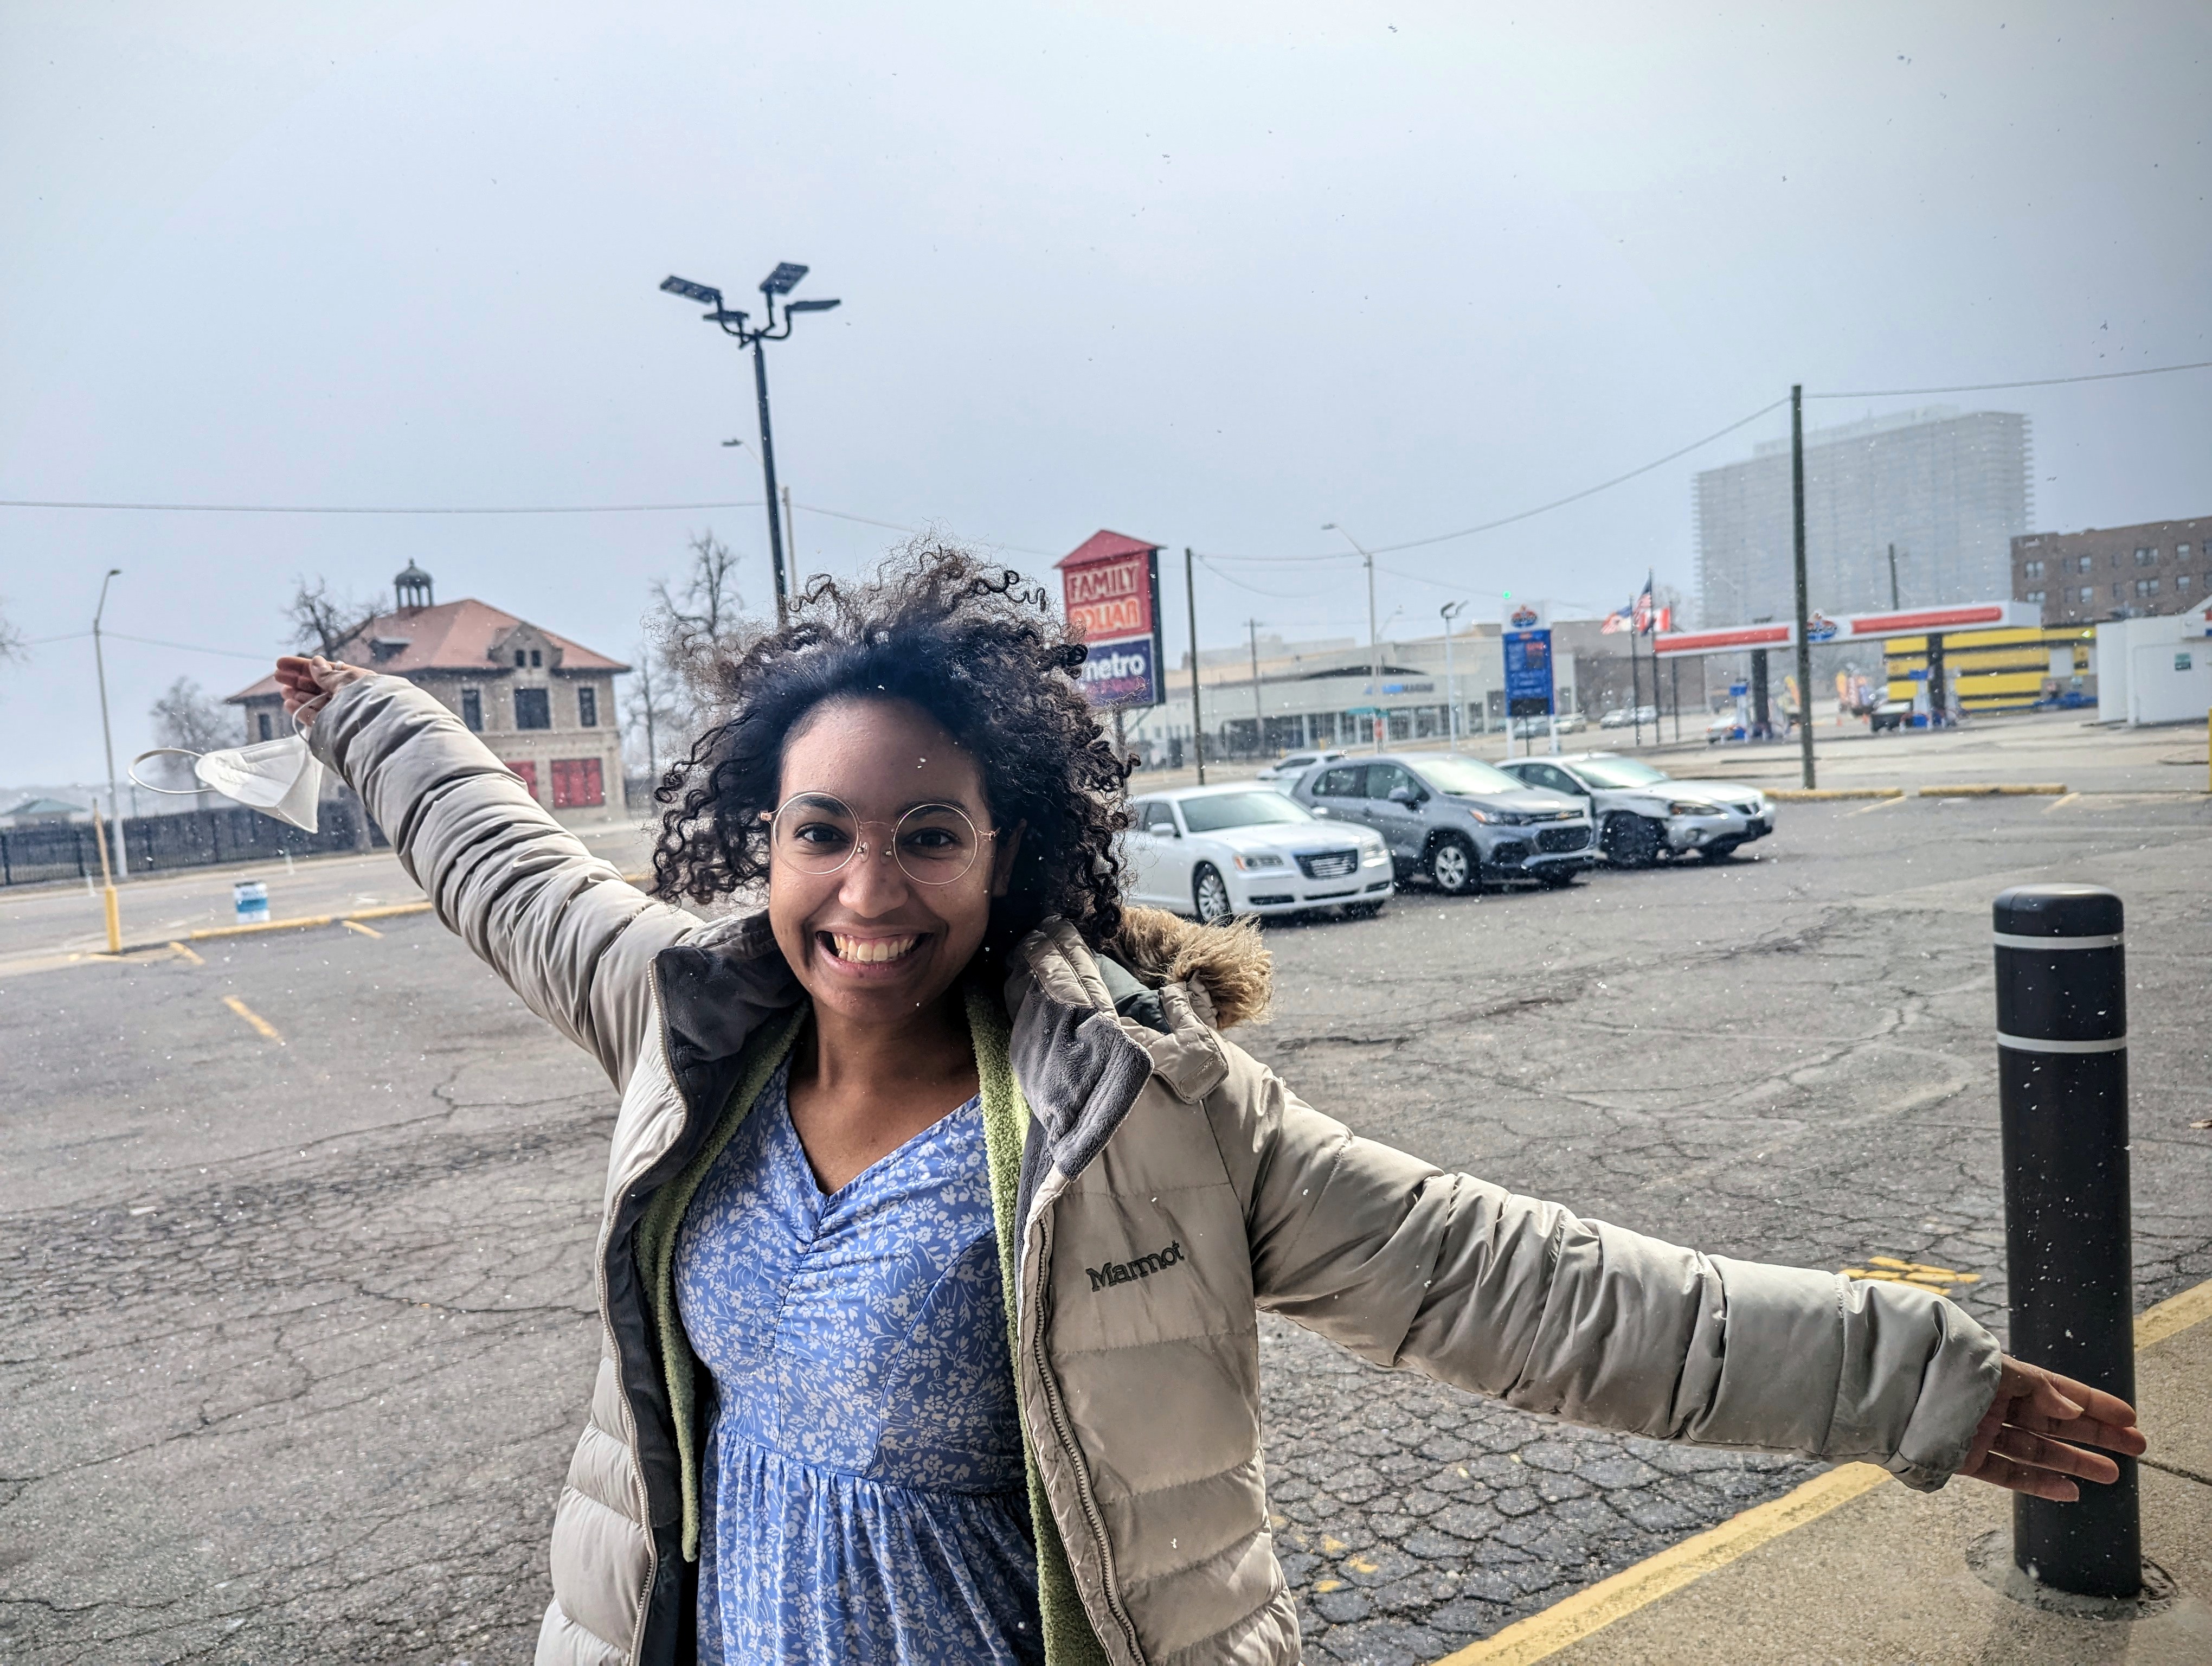 A photo of Karen, a member of Detroit Peer Respite, standing in a parking lot with outstretched arms.